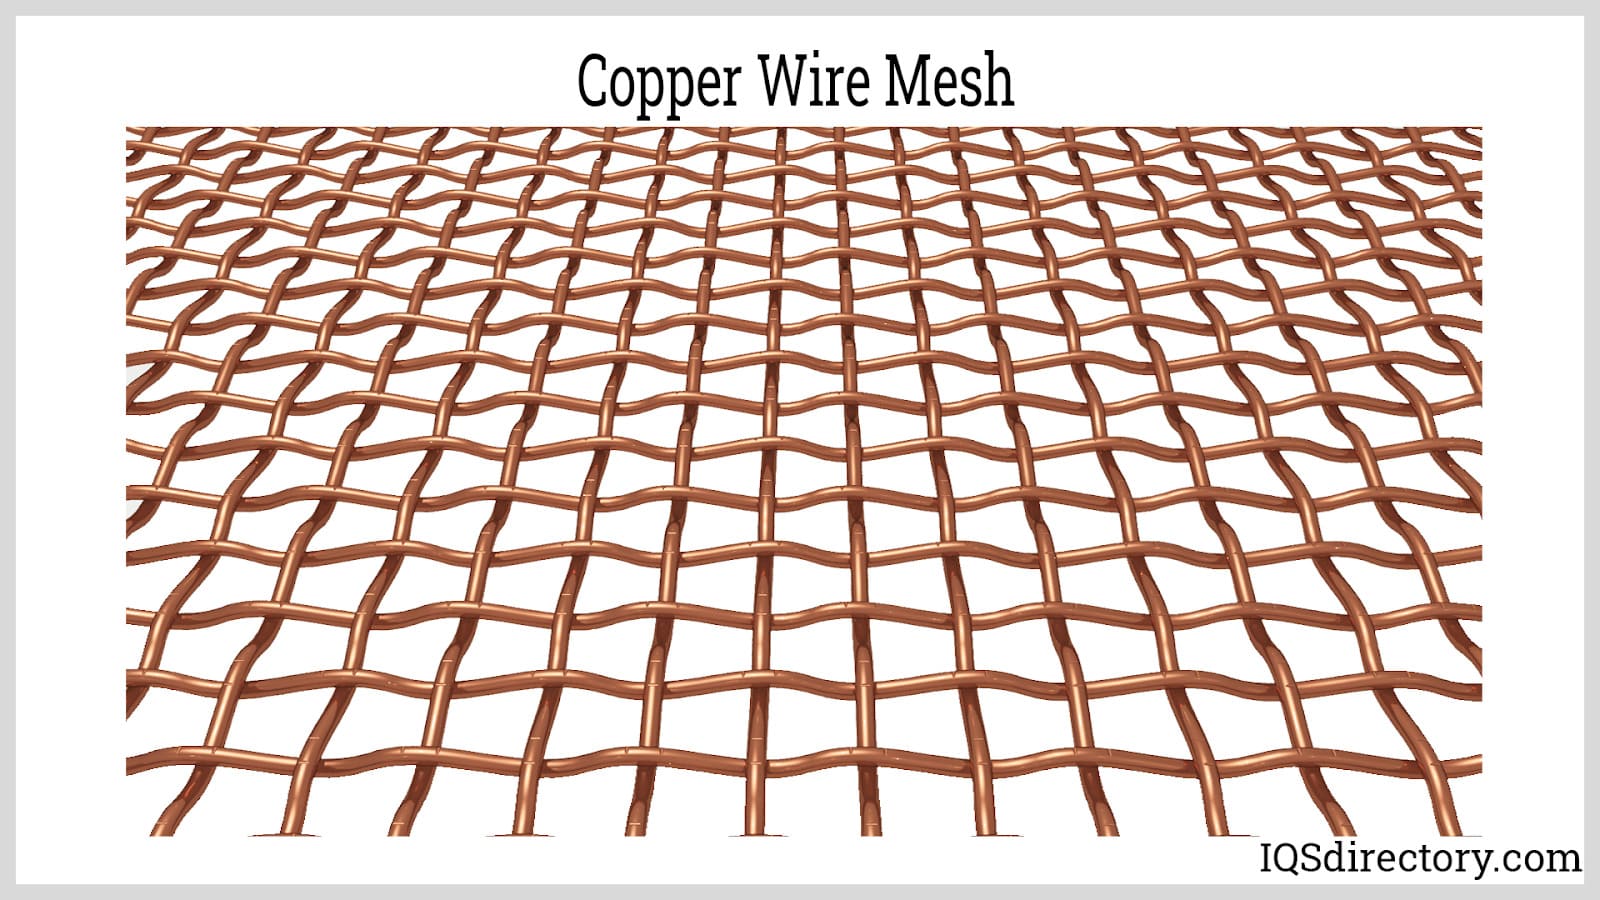 /articles/wire-mesh/basics-of